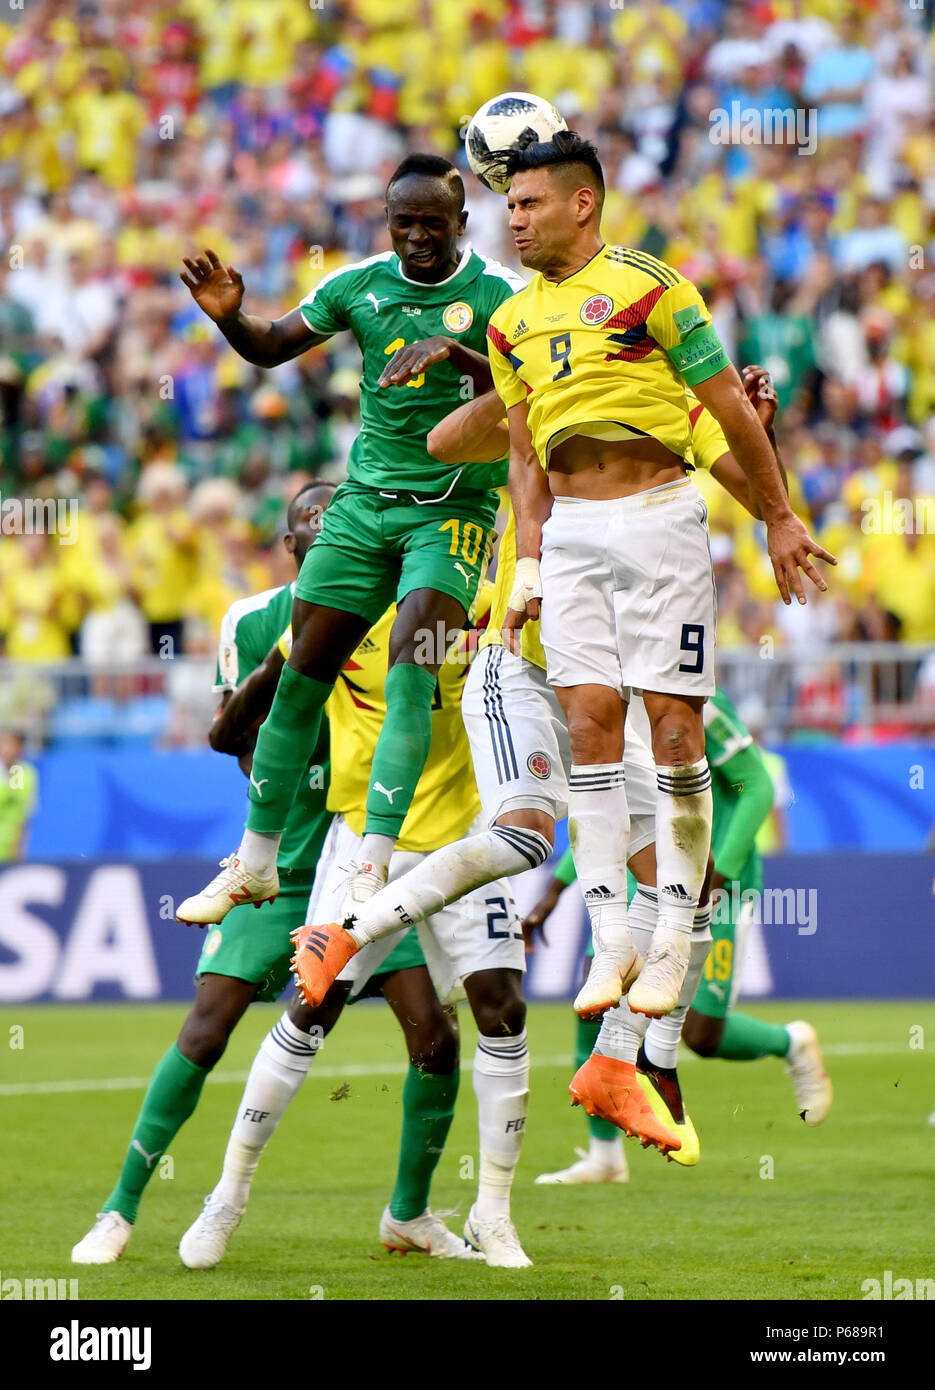 Samara, Russia. 28th June, 2018. Radamel Falcao (R) of Colombia competes for a header with Sadio Mane of Senegal during the 2018 FIFA World Cup Group H match between Colombia and Senegal in Samara, Russia, June 28, 2018. Credit: Liu Dawei/Xinhua/Alamy Live News Stock Photo